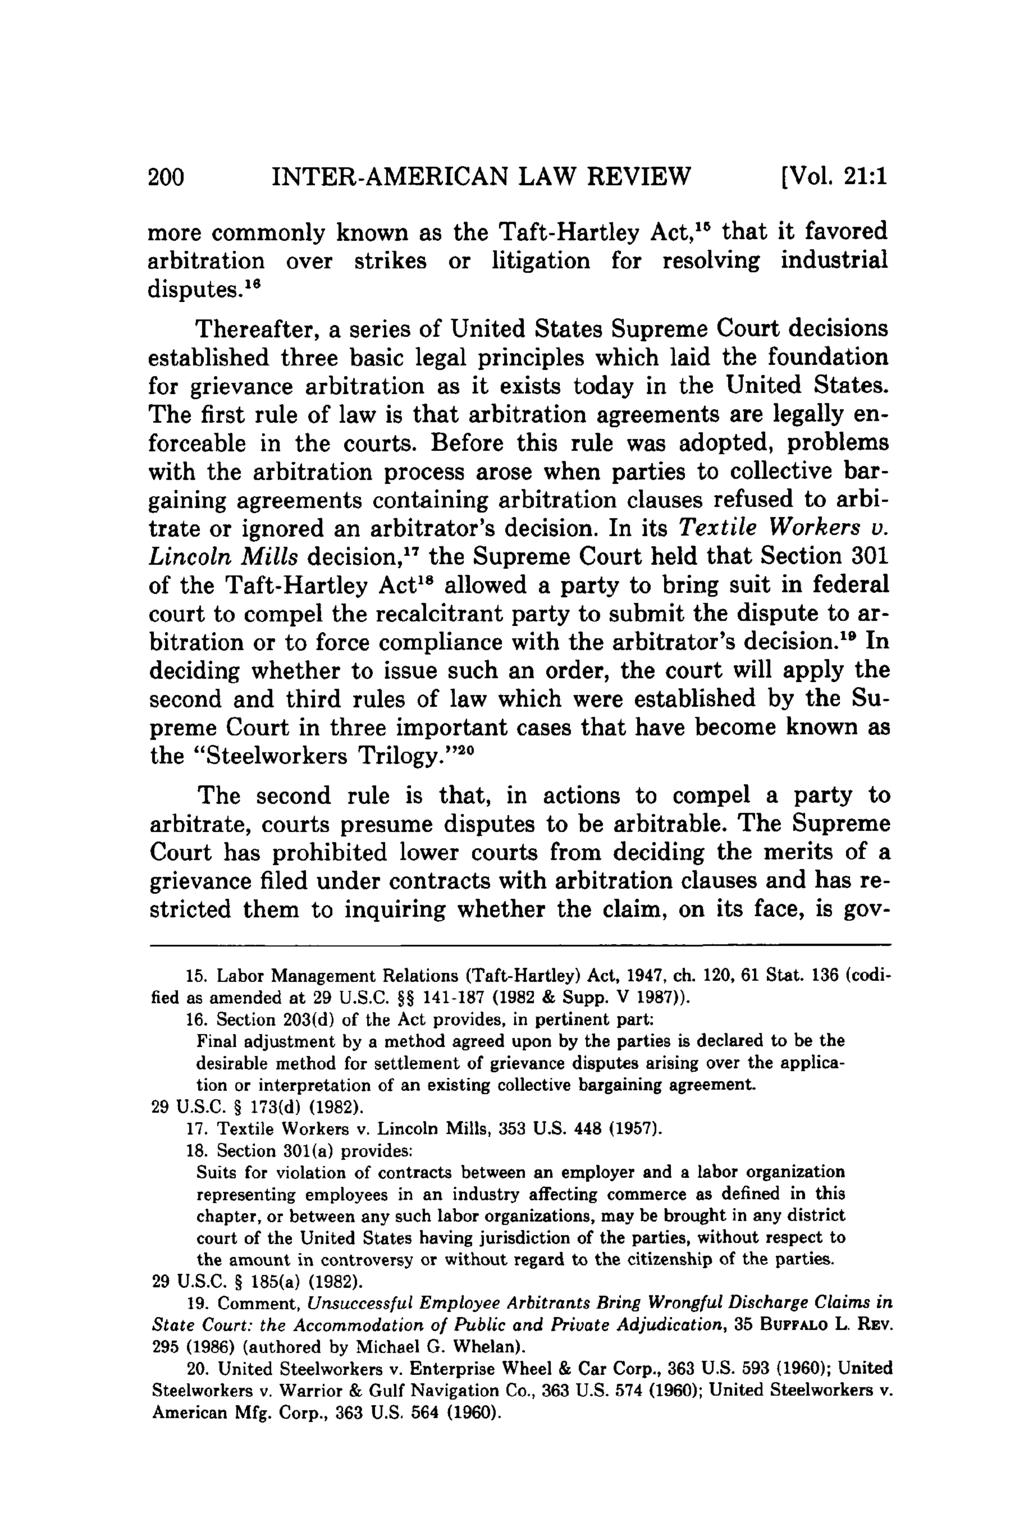 INTER-AMERICAN LAW REVIEW [Vol. 21:1 more commonly known as the Taft-Hartley Act, 15 that it favored arbitration over strikes or litigation for resolving industrial disputes.